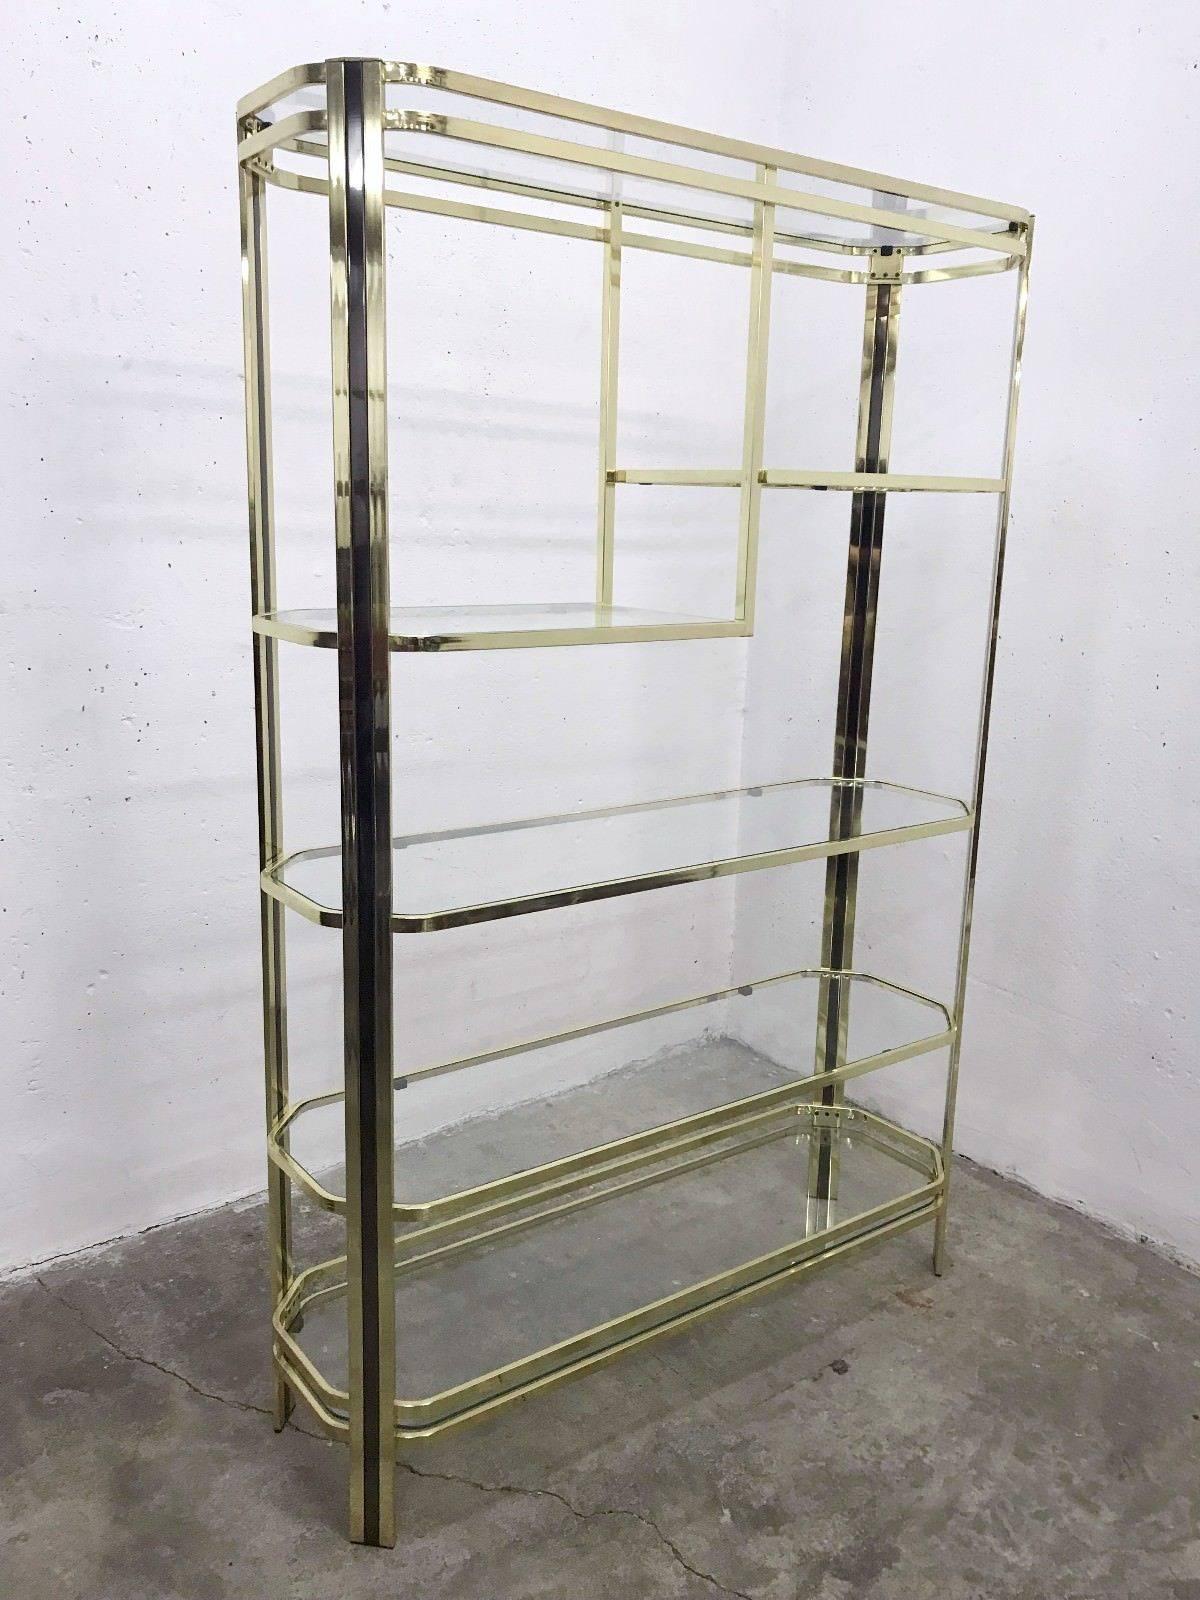 Brass shelf, vintage, circa 1970. Romeo Rega style
Modernist design - Italy
Material: Brass metal structure and glass shelves
Dimensions: H 180 x Lar 122 x D 38 cm
Nice condition!